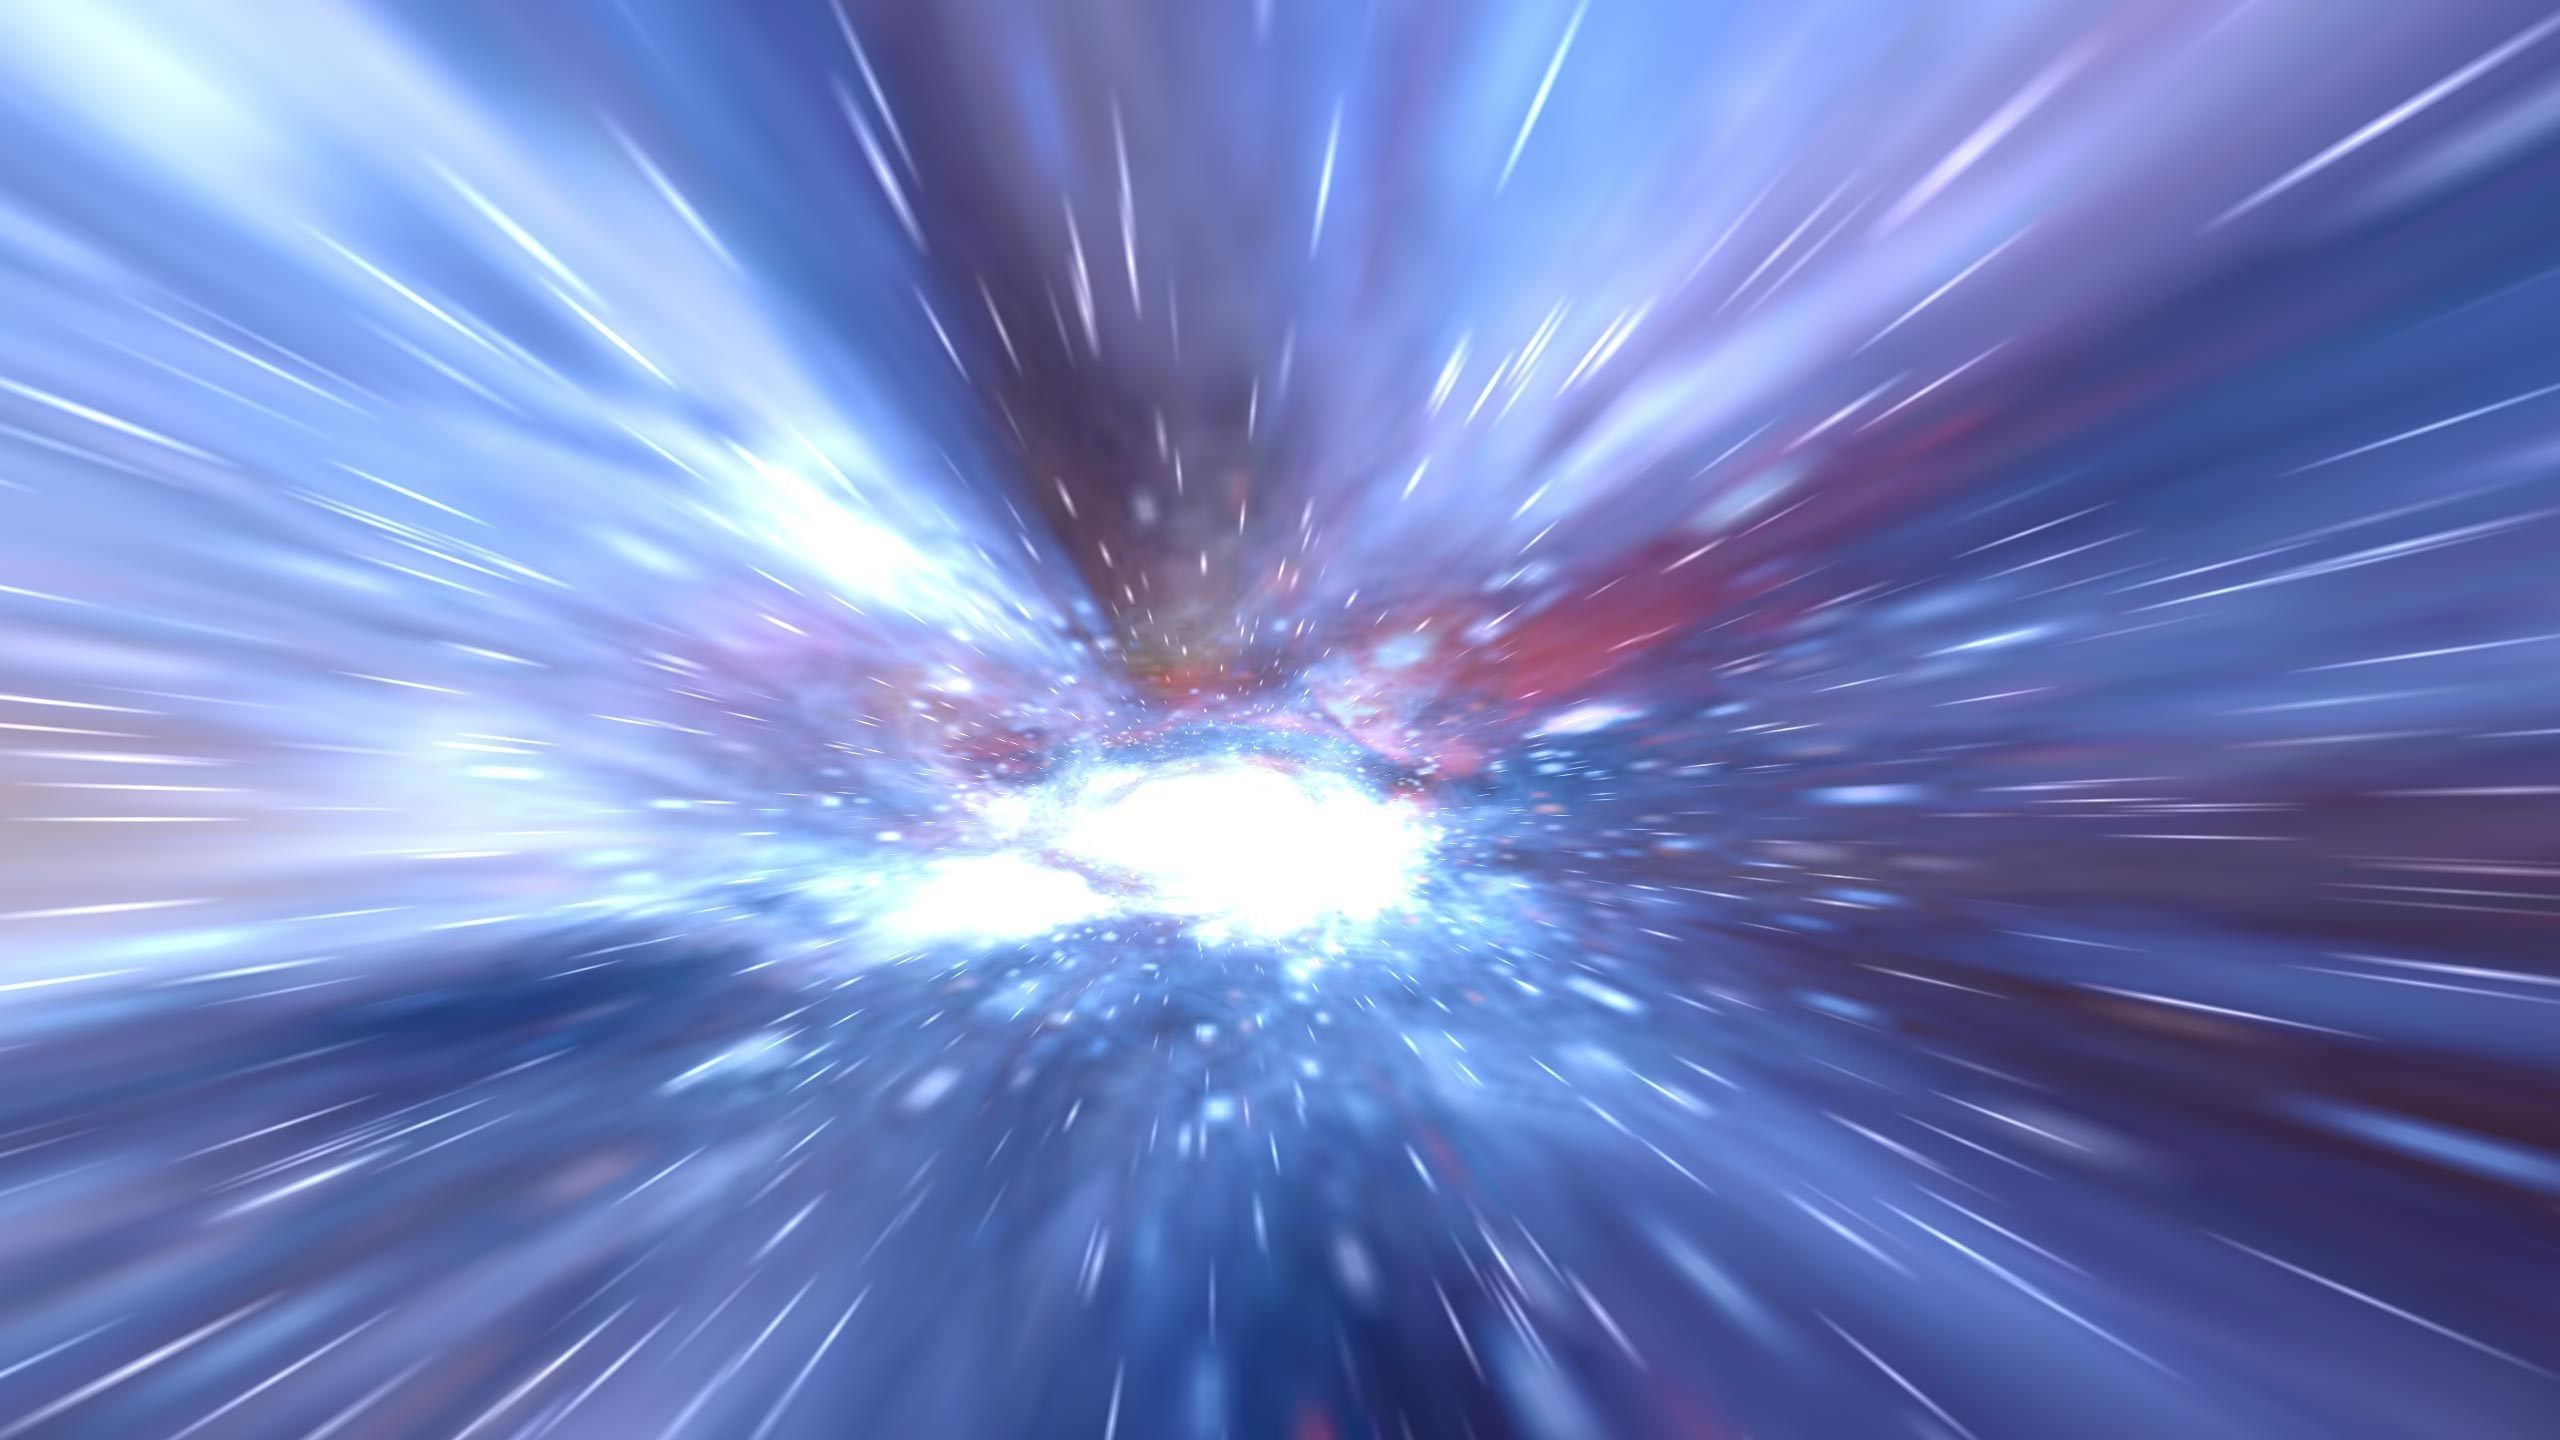 2560x1440 Free Android Hyperspace 3d Live Wallpaper Hyperspace 2560x1440 Wallpaper Teahub Io